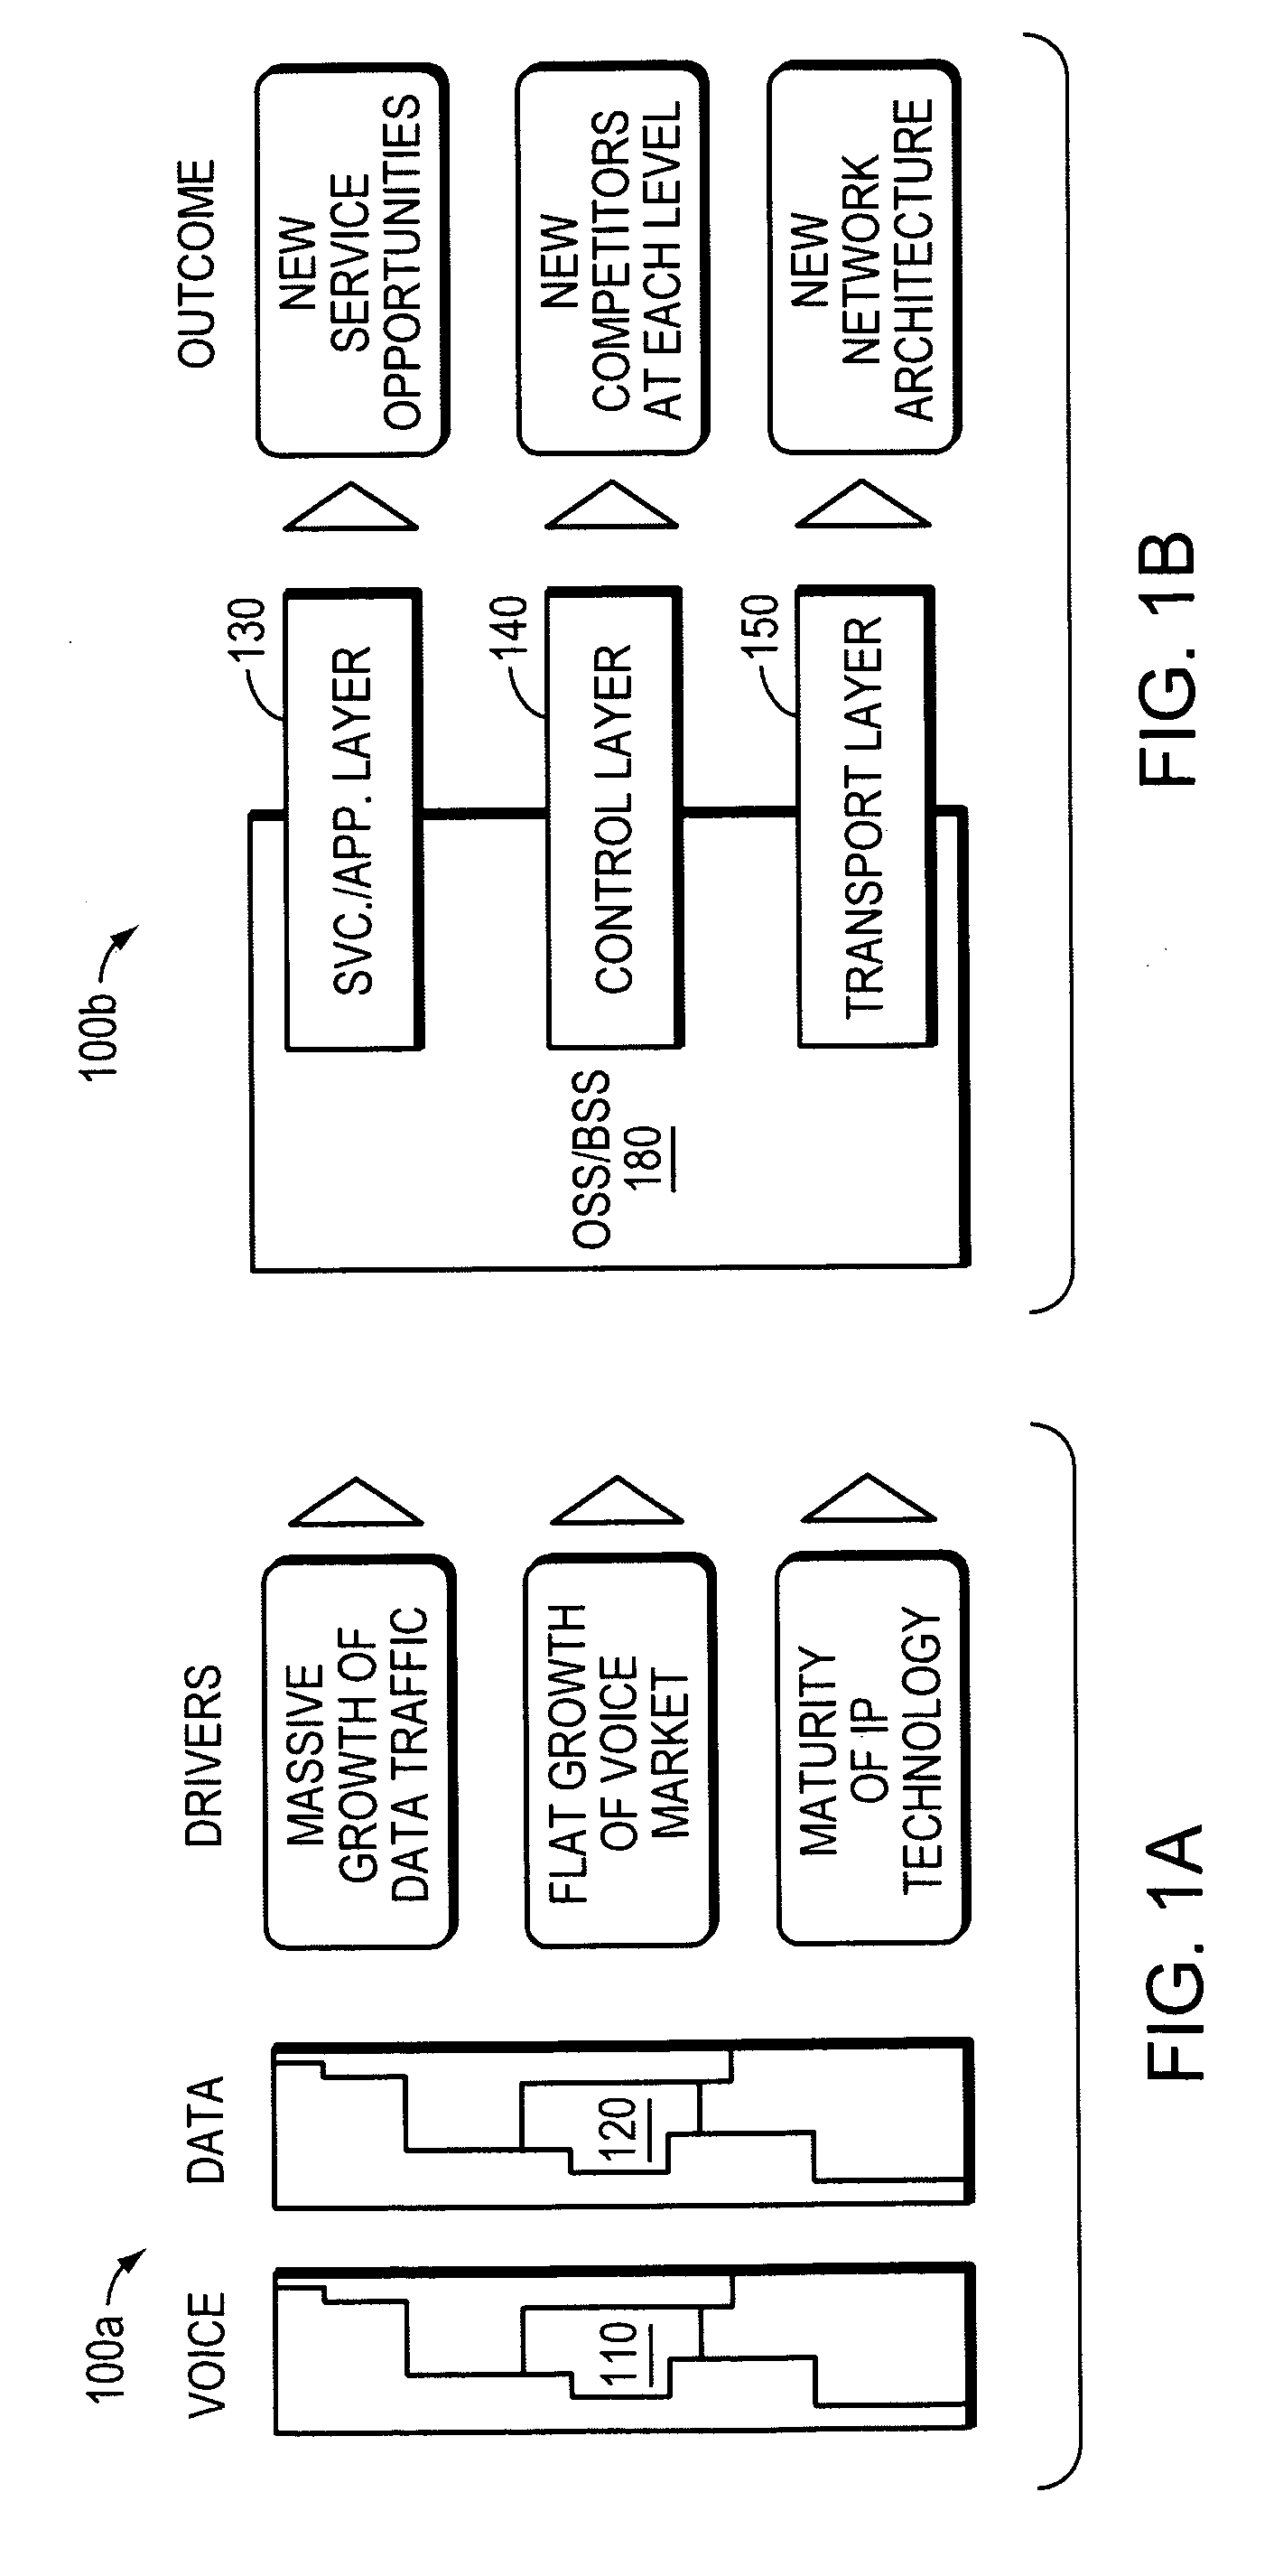 Software control plane for switches and routers